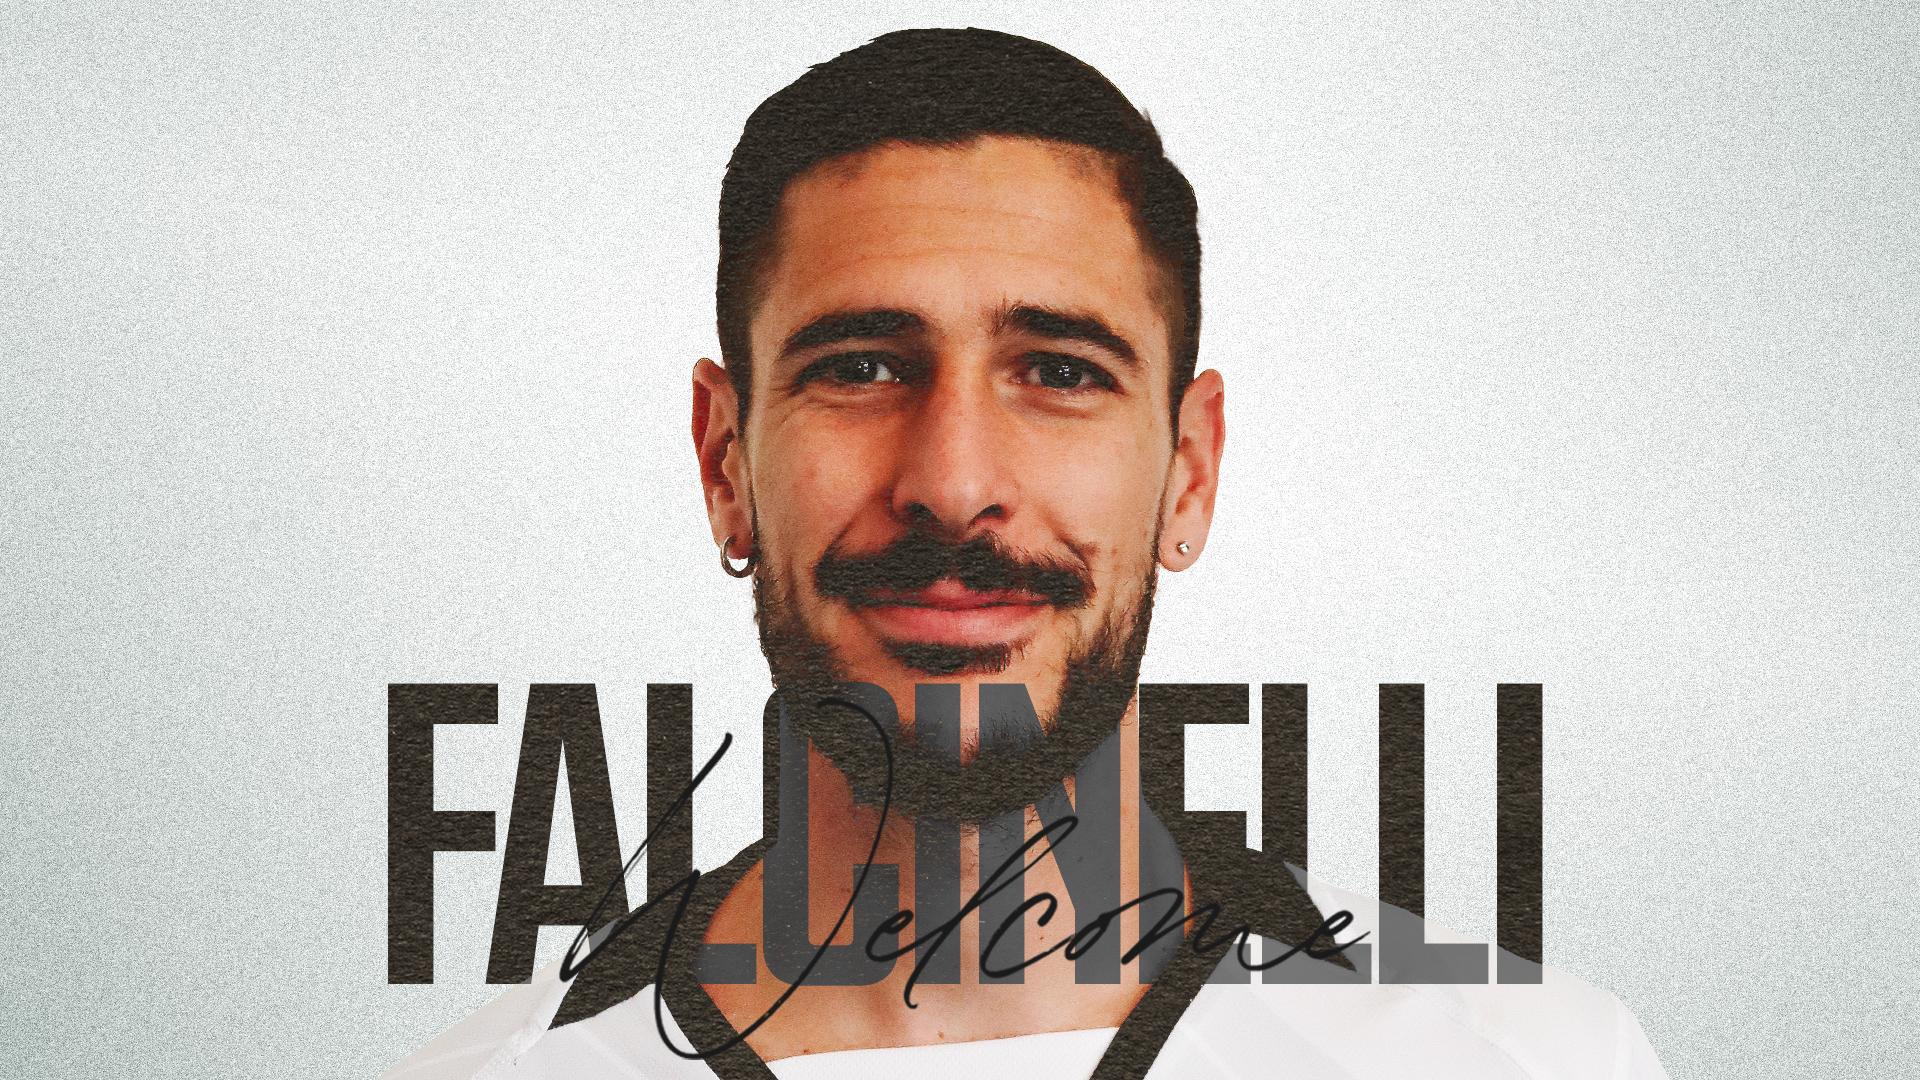 Official | Diego falcinelli is a new Spezia player